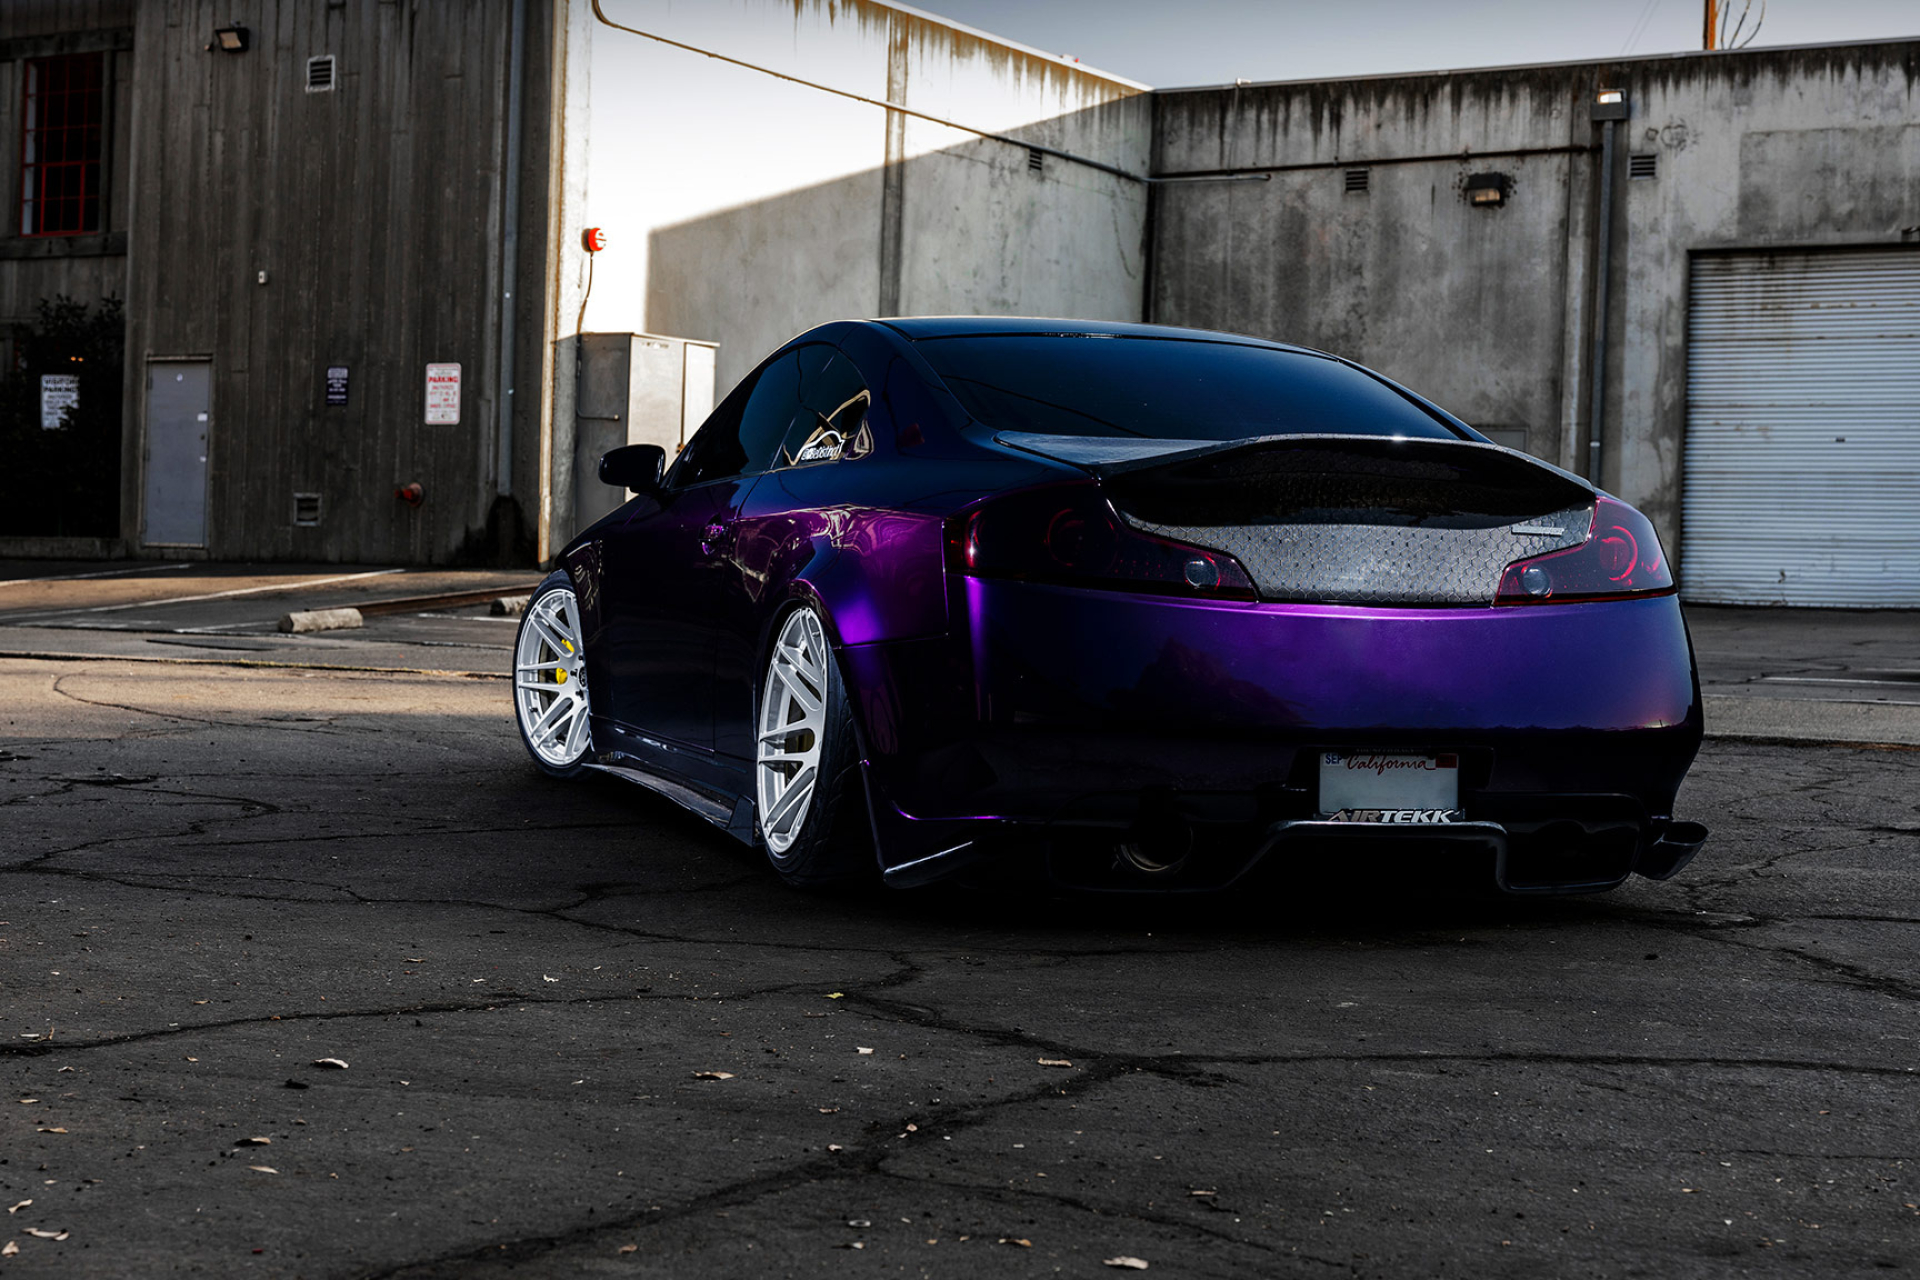 Stunning Purple Infiniti G35 With Forgestar F14 Wheels in Gloss Silver | Forgestar 1920x1280